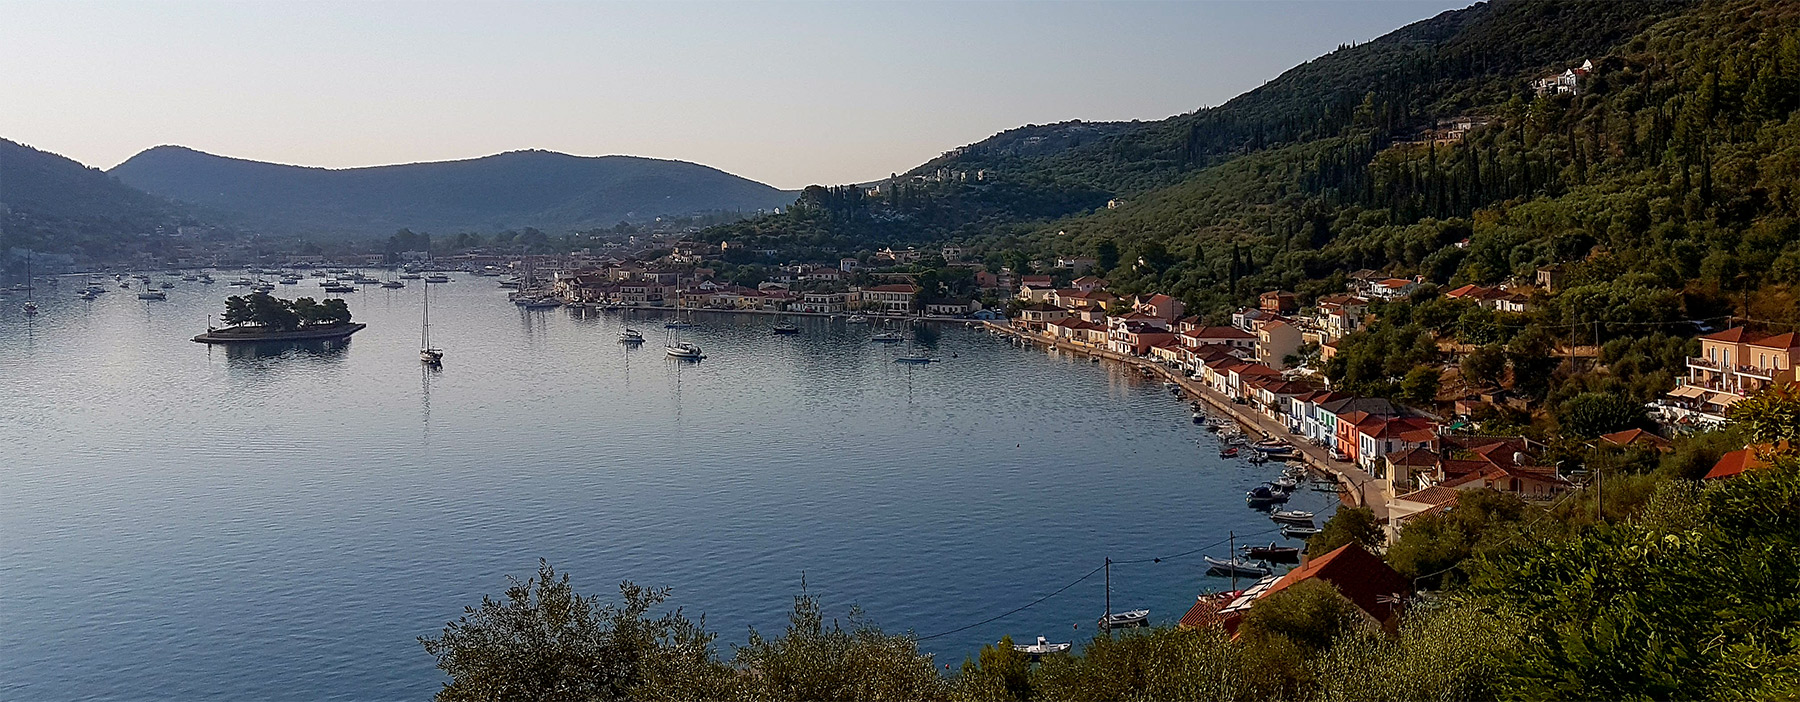 Ithaca Transfers - Ithaca Tours - Ithaca Private Tours - Ithaca Taxi - Ithaca Minibus - Ithaca Private Transfers - Ithaca chauffeur services - Ithaca Island Tour - Taxi Ithaca Greece - Taxi Transfers Ithaca